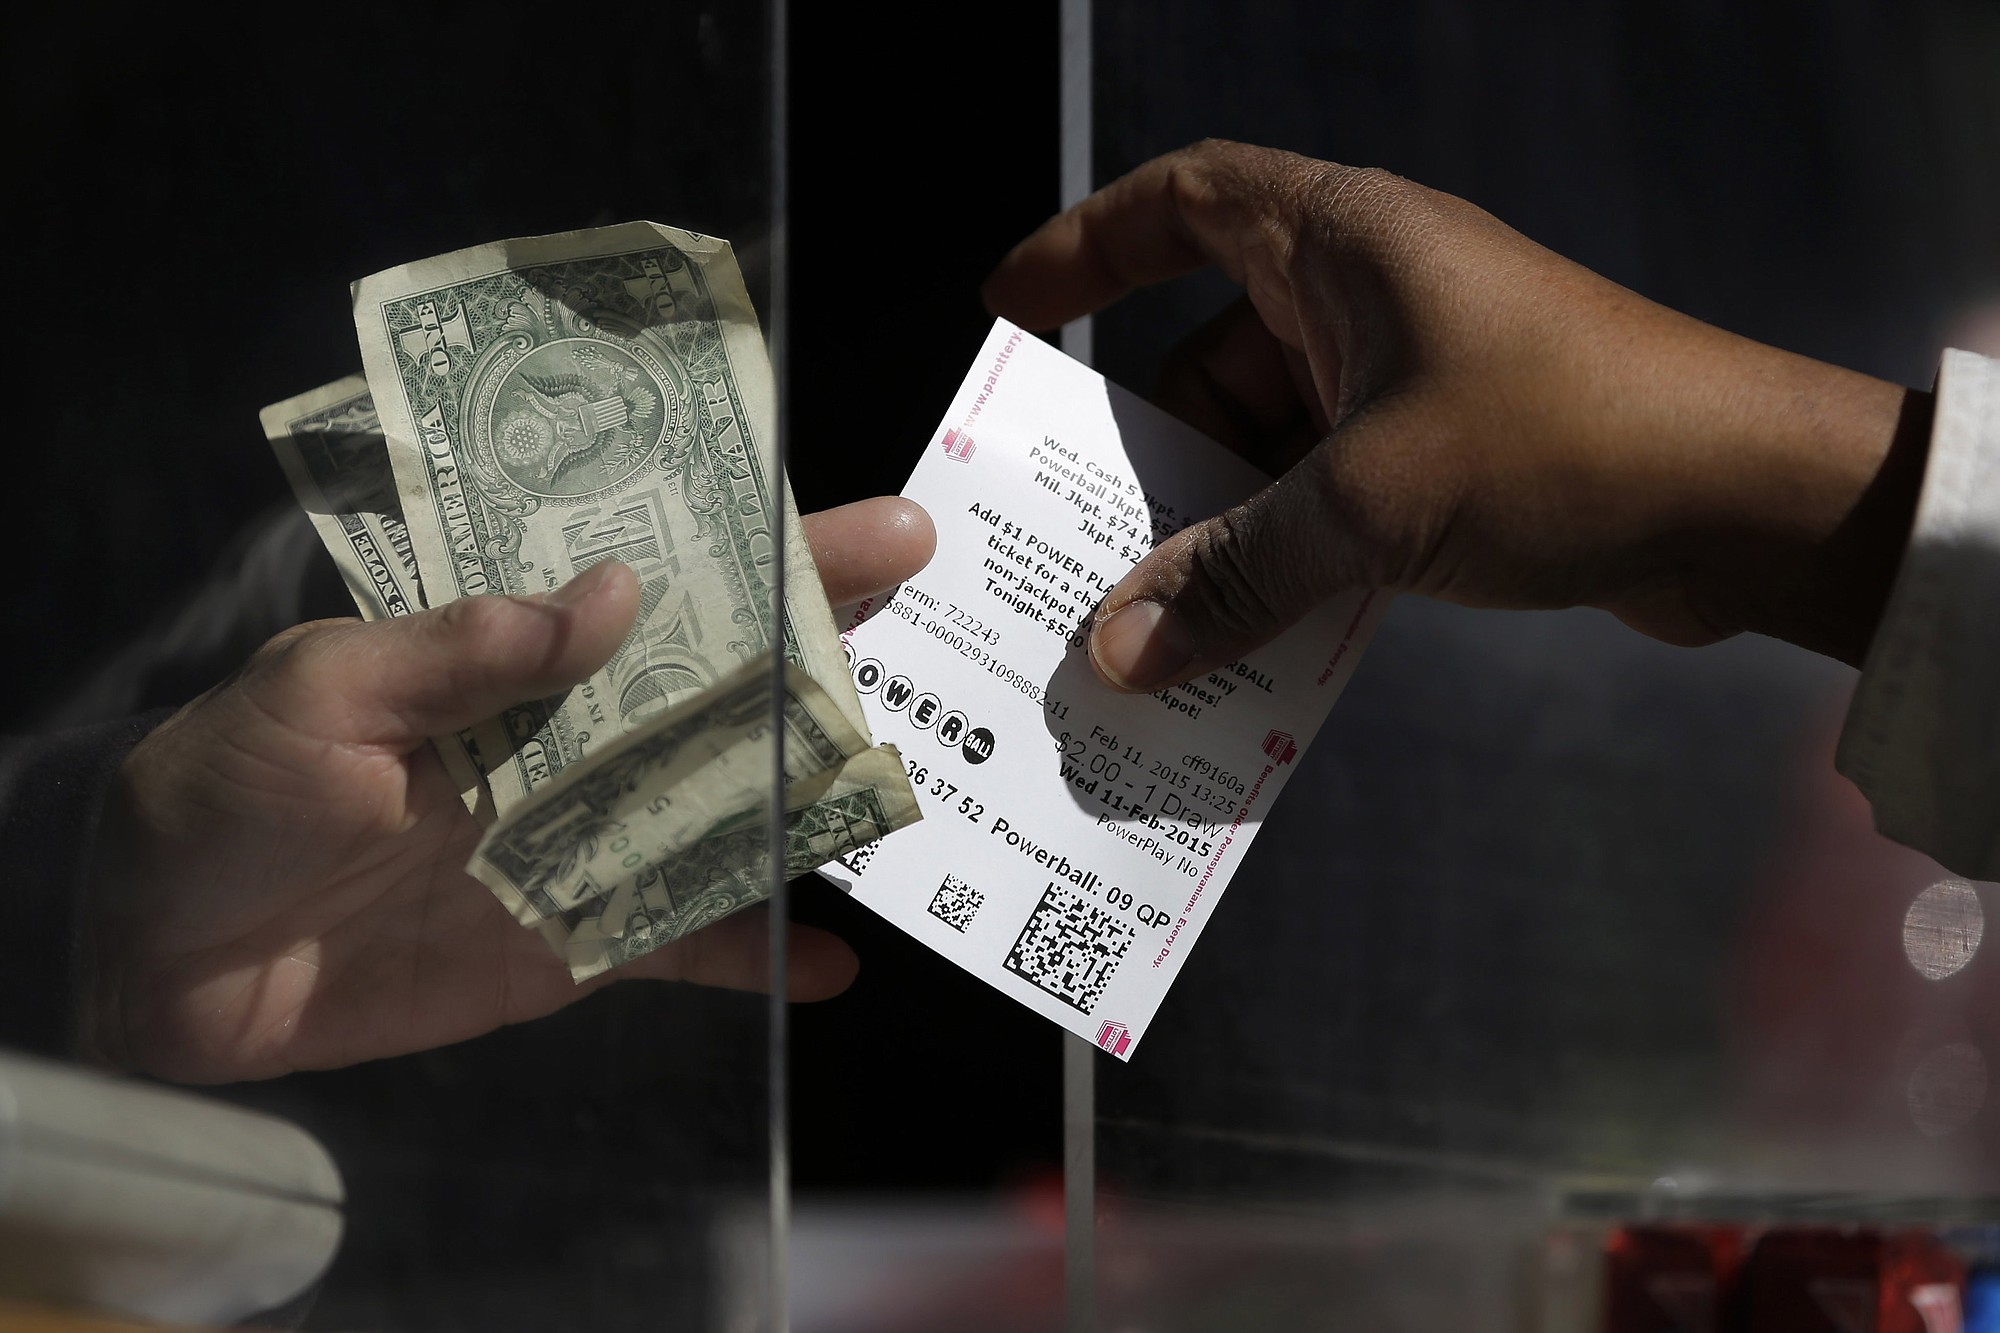 A woman buys a Powerball ticket at a newsstand, Wednesday in Philadelphia. The Powerball jackpot has climbed to $500 million, making Wednesday night's drawing the fifth largest prize in U.S.